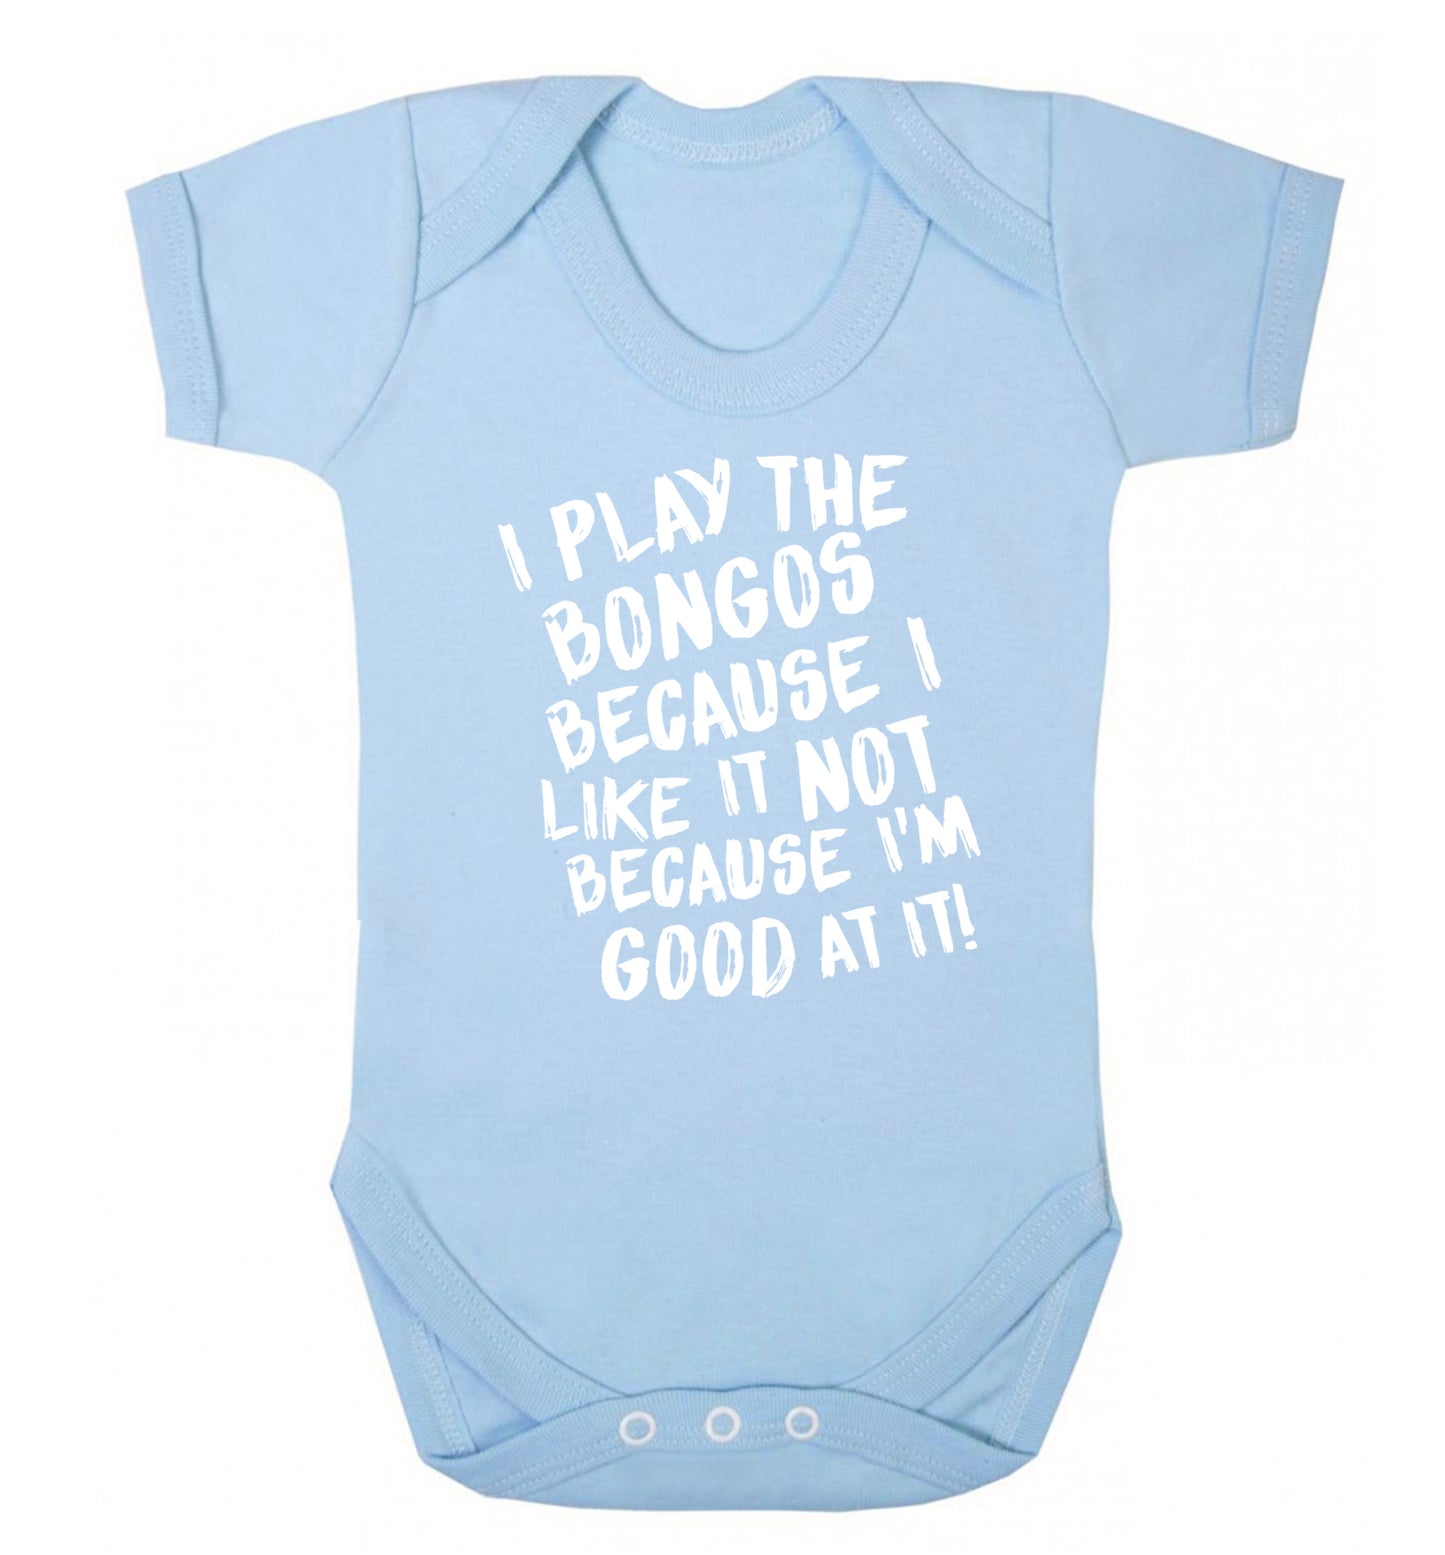 I play the bongos because I like it not because I'm good at it Baby Vest pale blue 18-24 months